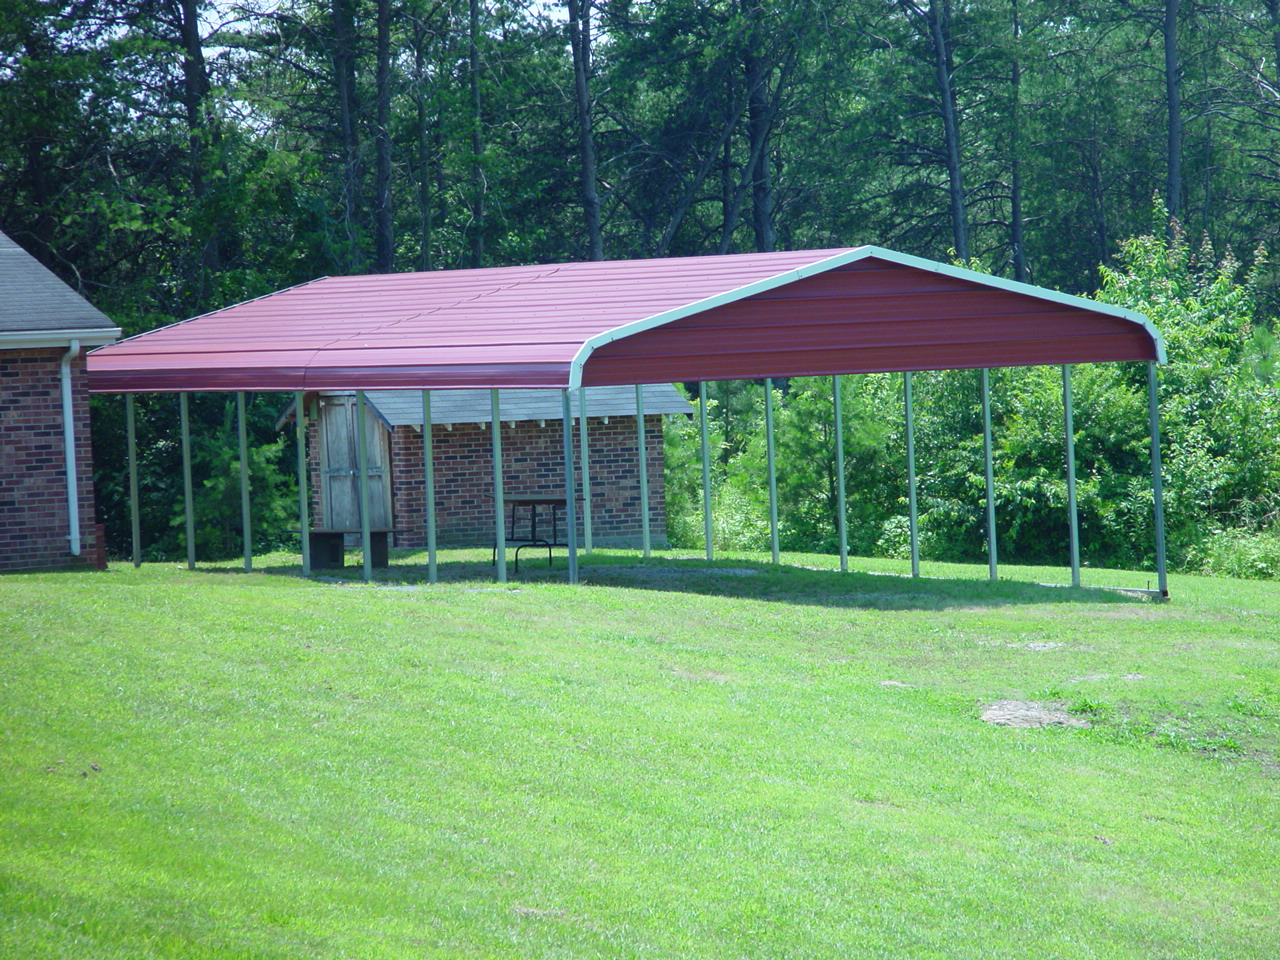 Garden yard gazebo with red gables, roof, and white trim.